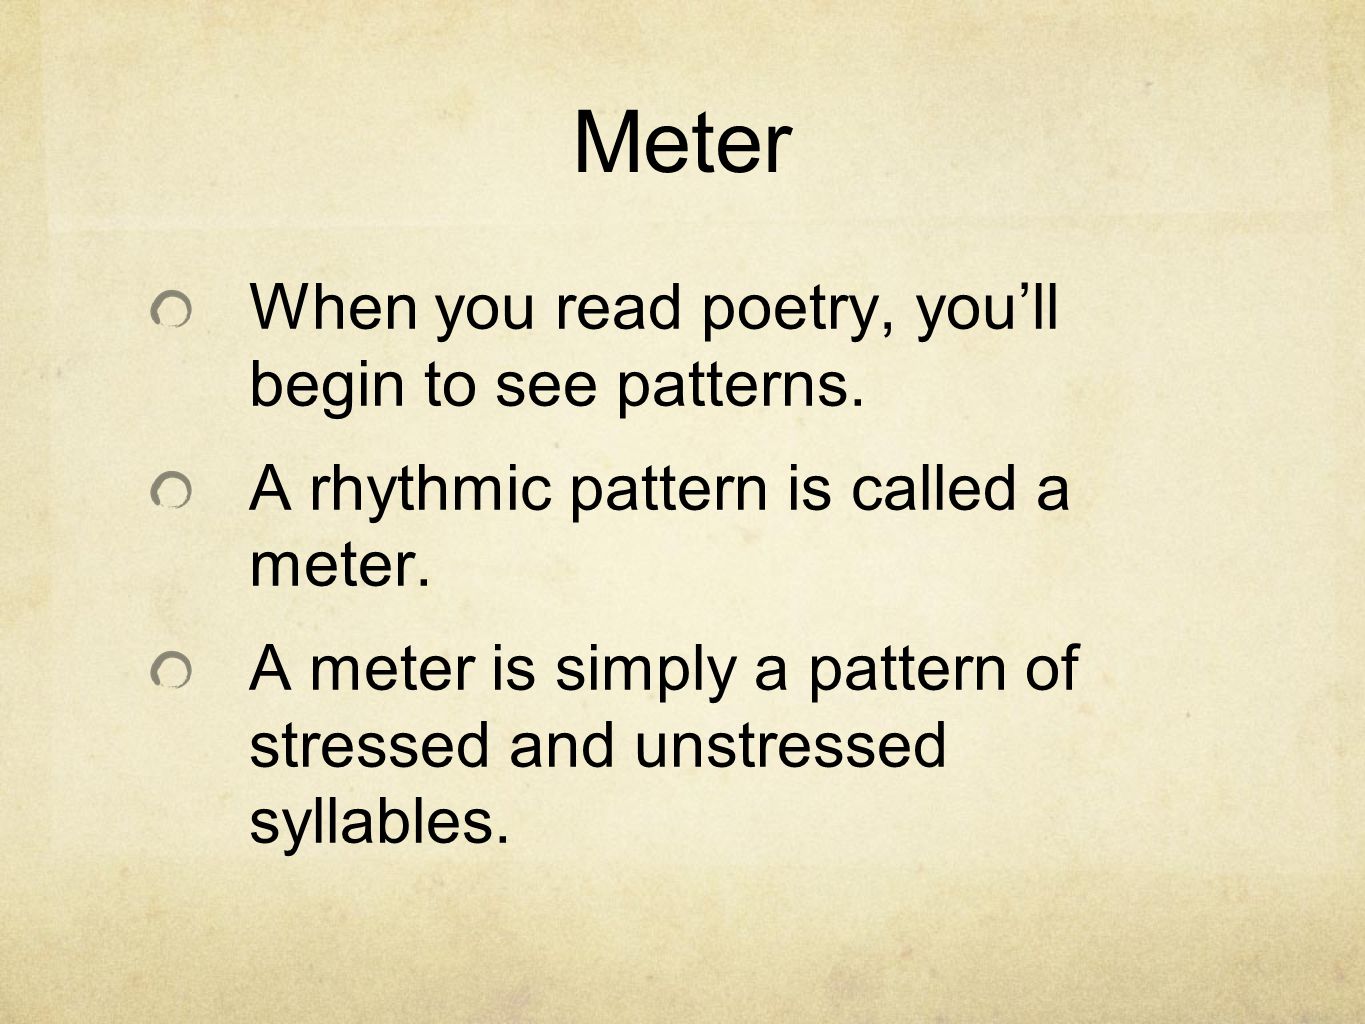 Meter When you read poetry, you’ll begin to see patterns.